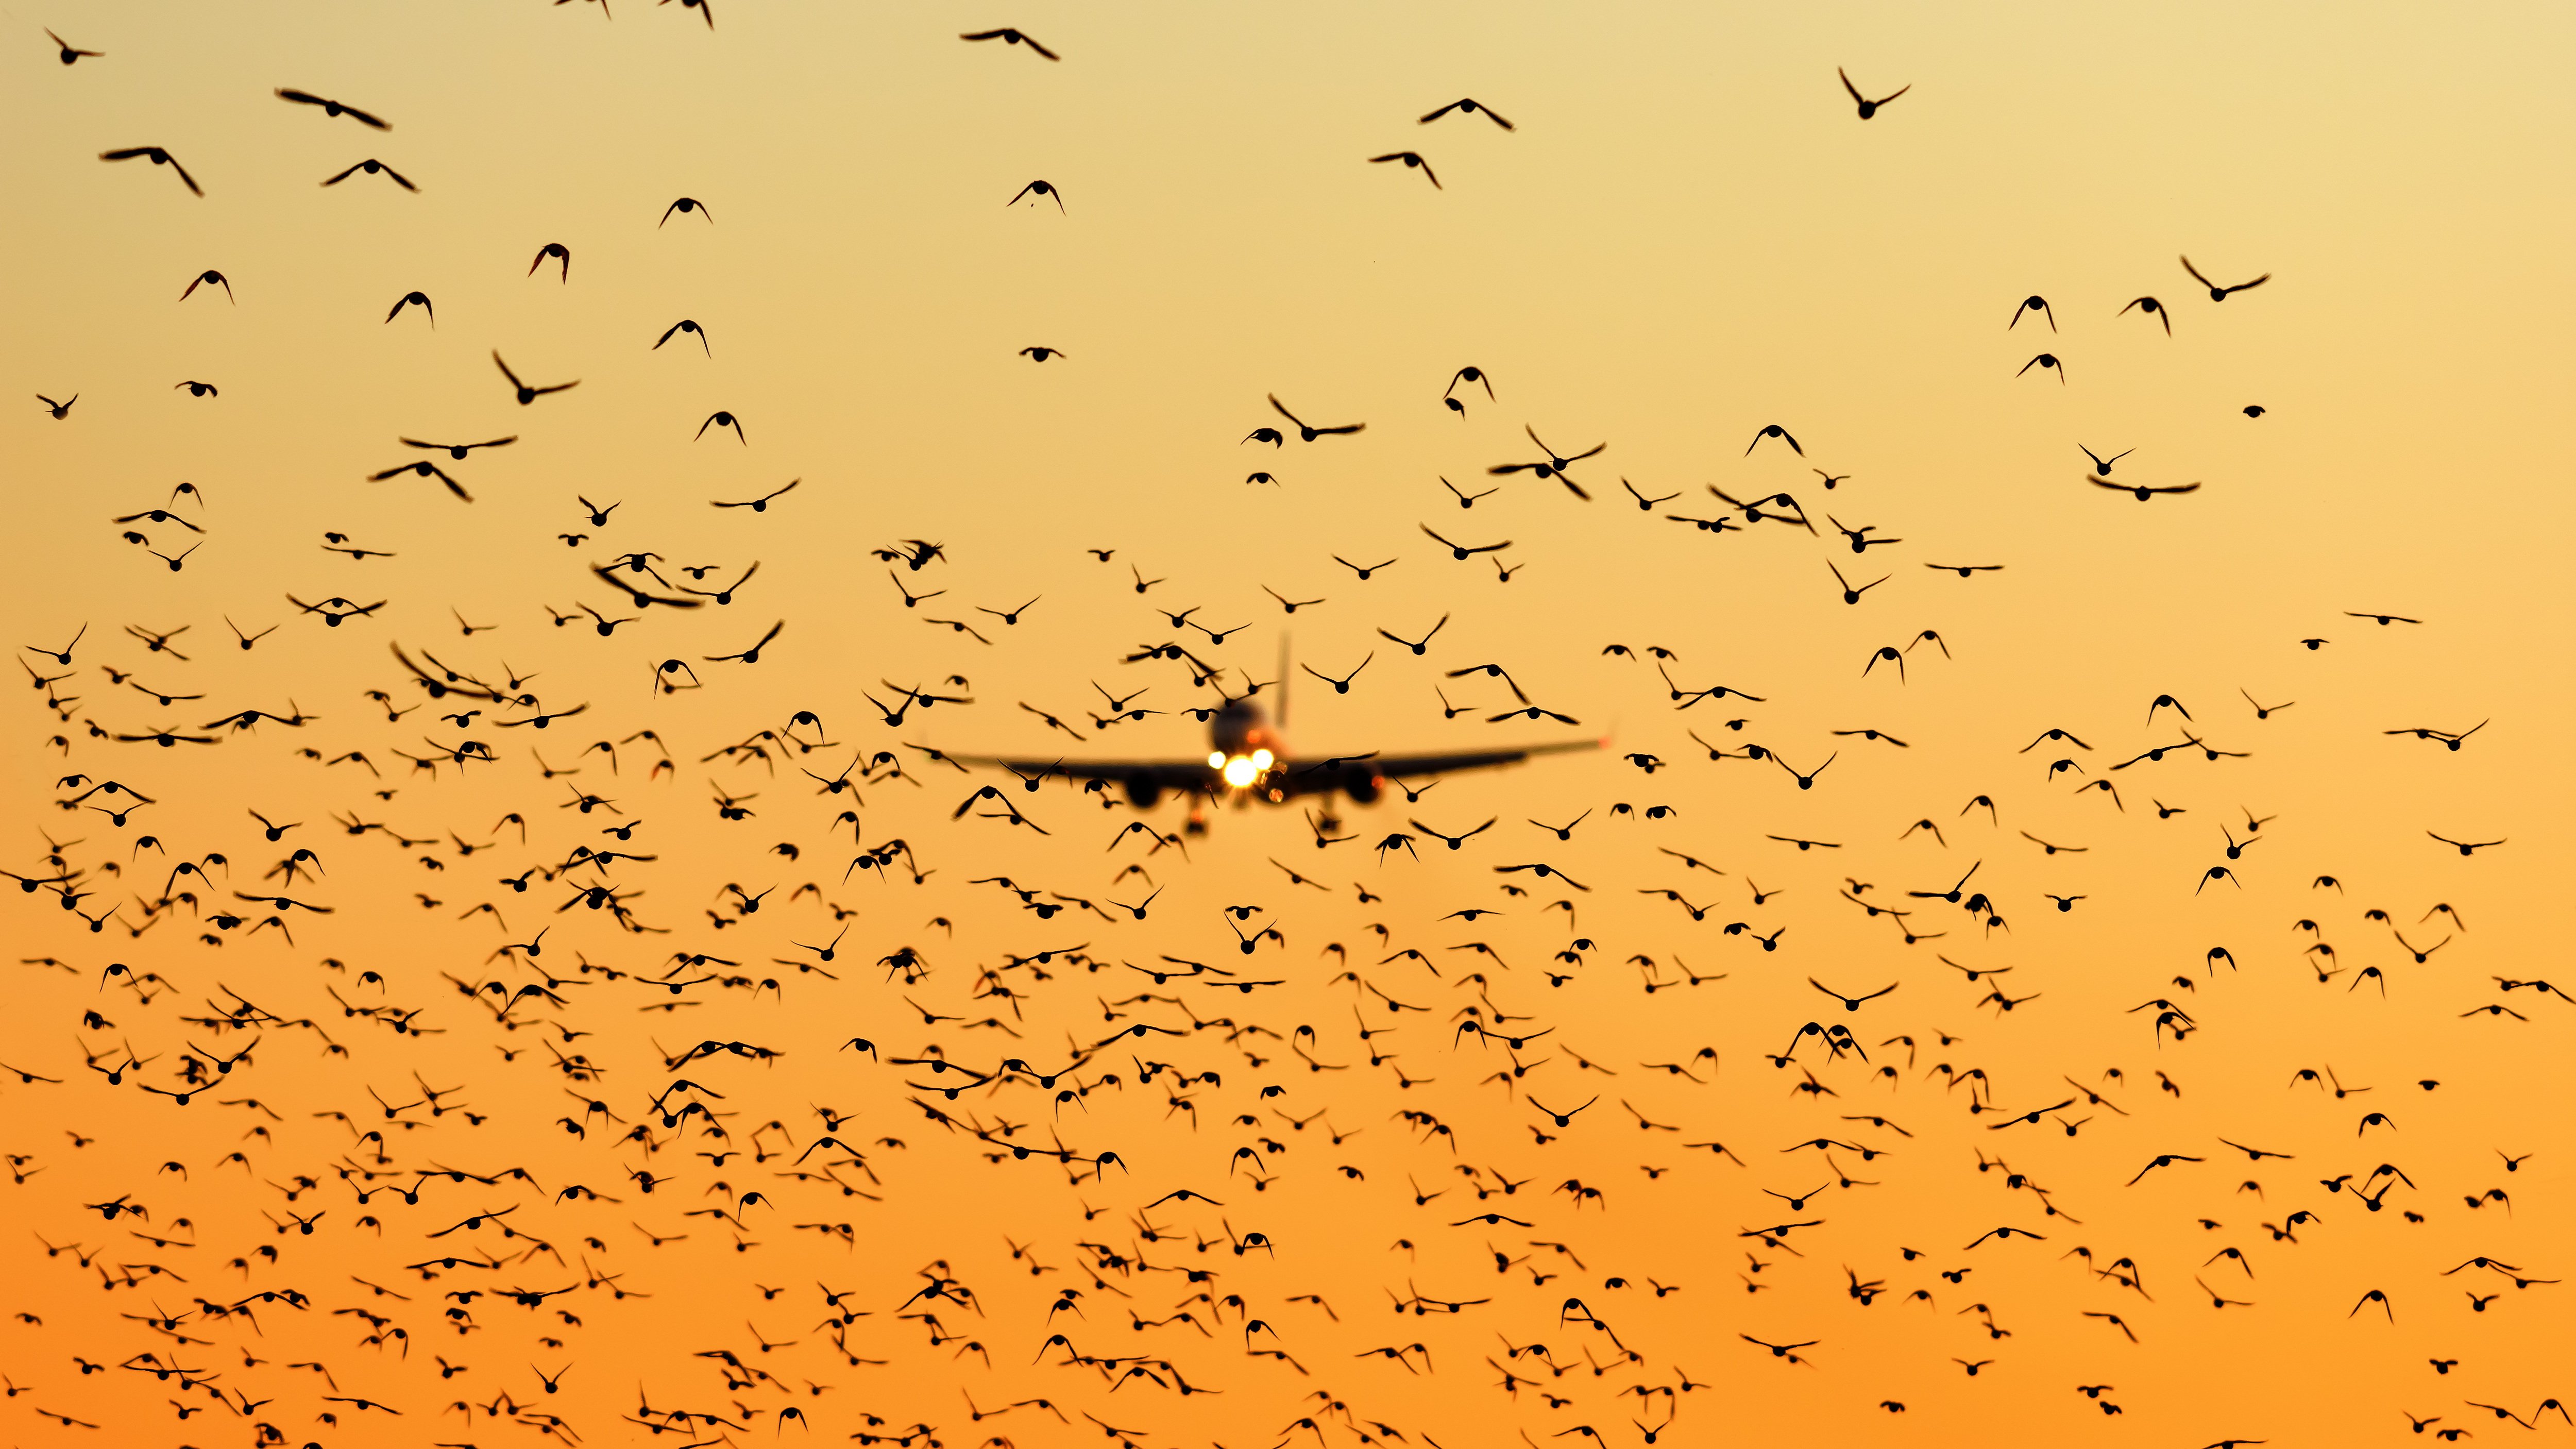 A passenger plane approaching, a flock of birds in front of it.